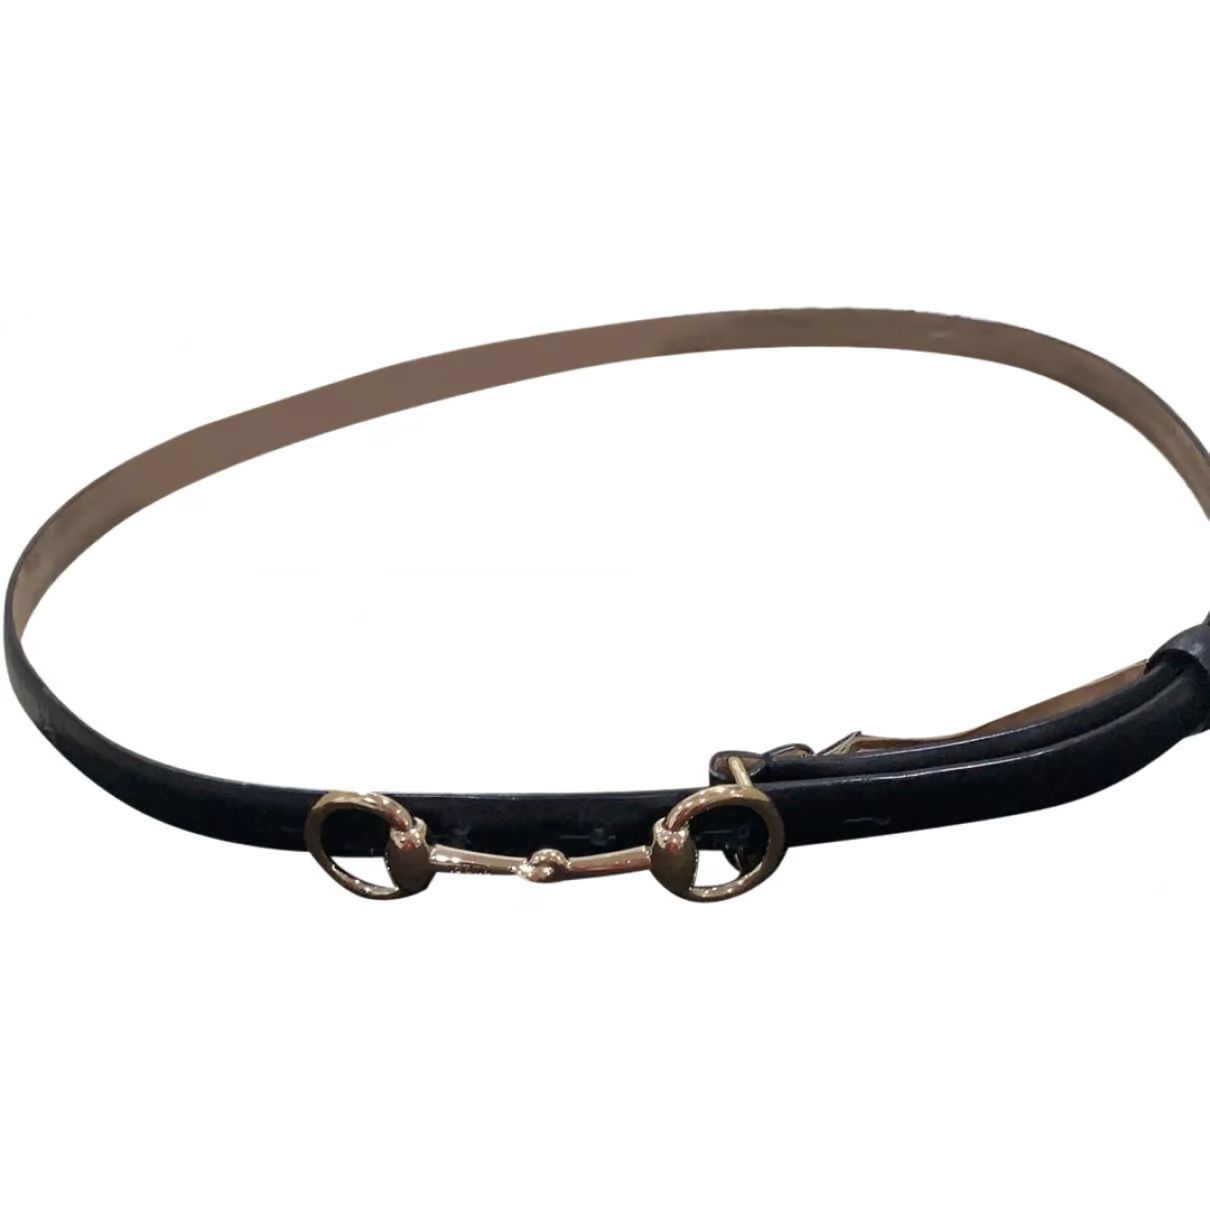 Leather belt | Vestiaire Collective (Global)